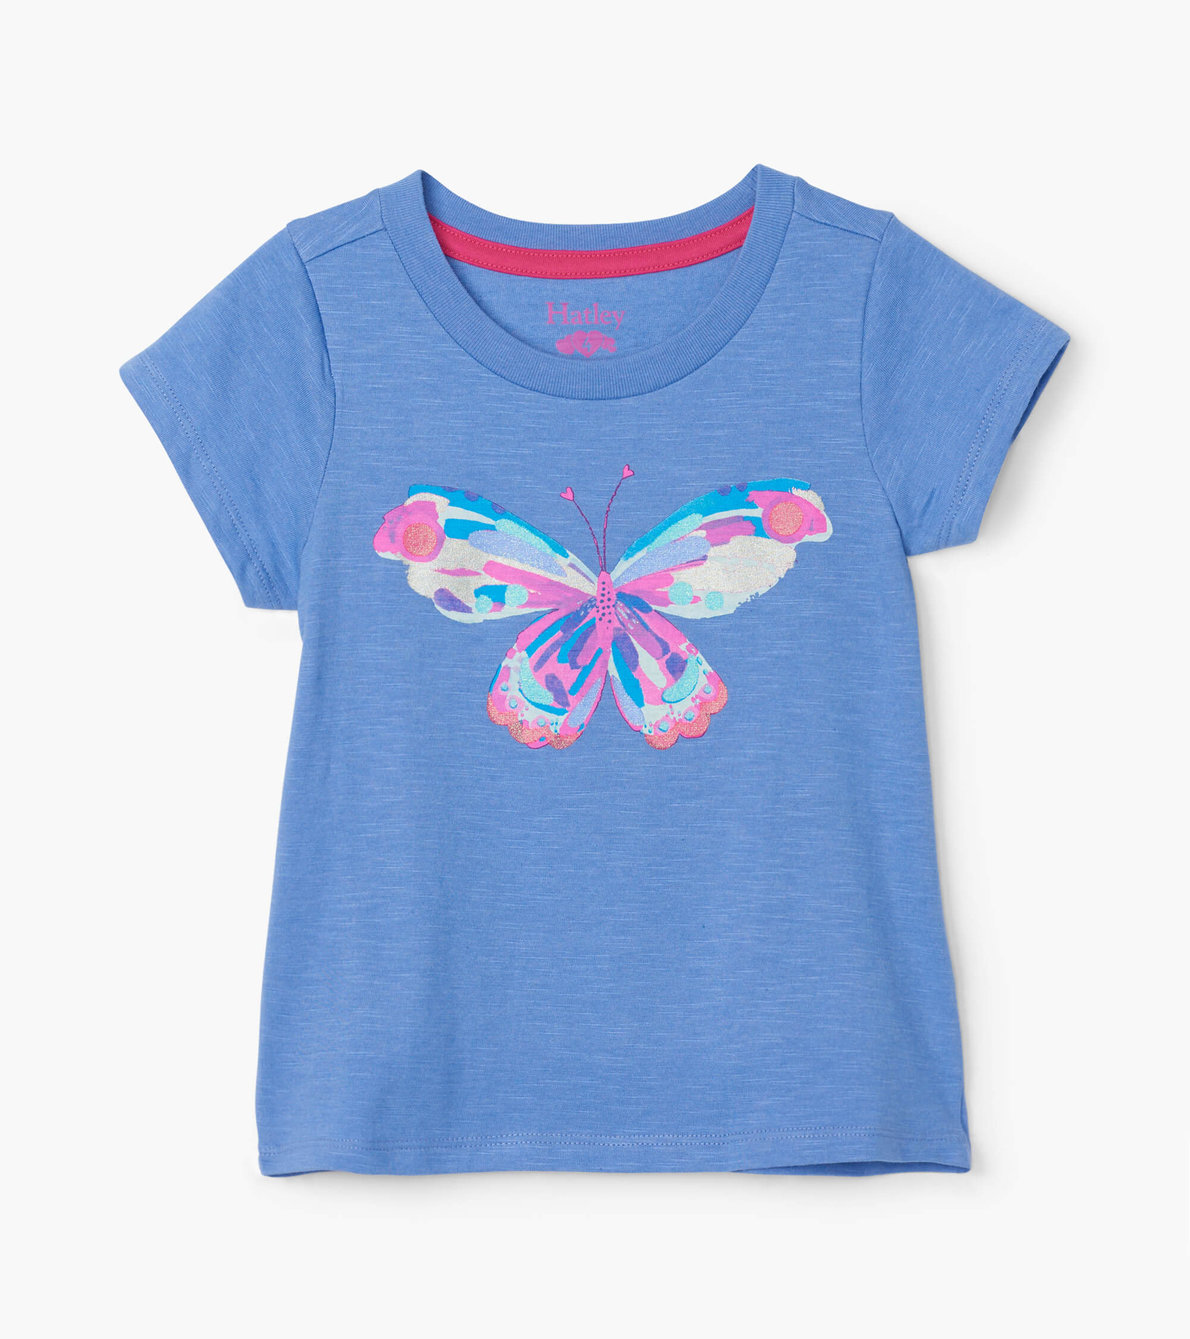 View larger image of Soaring Butterfly Graphic Tee